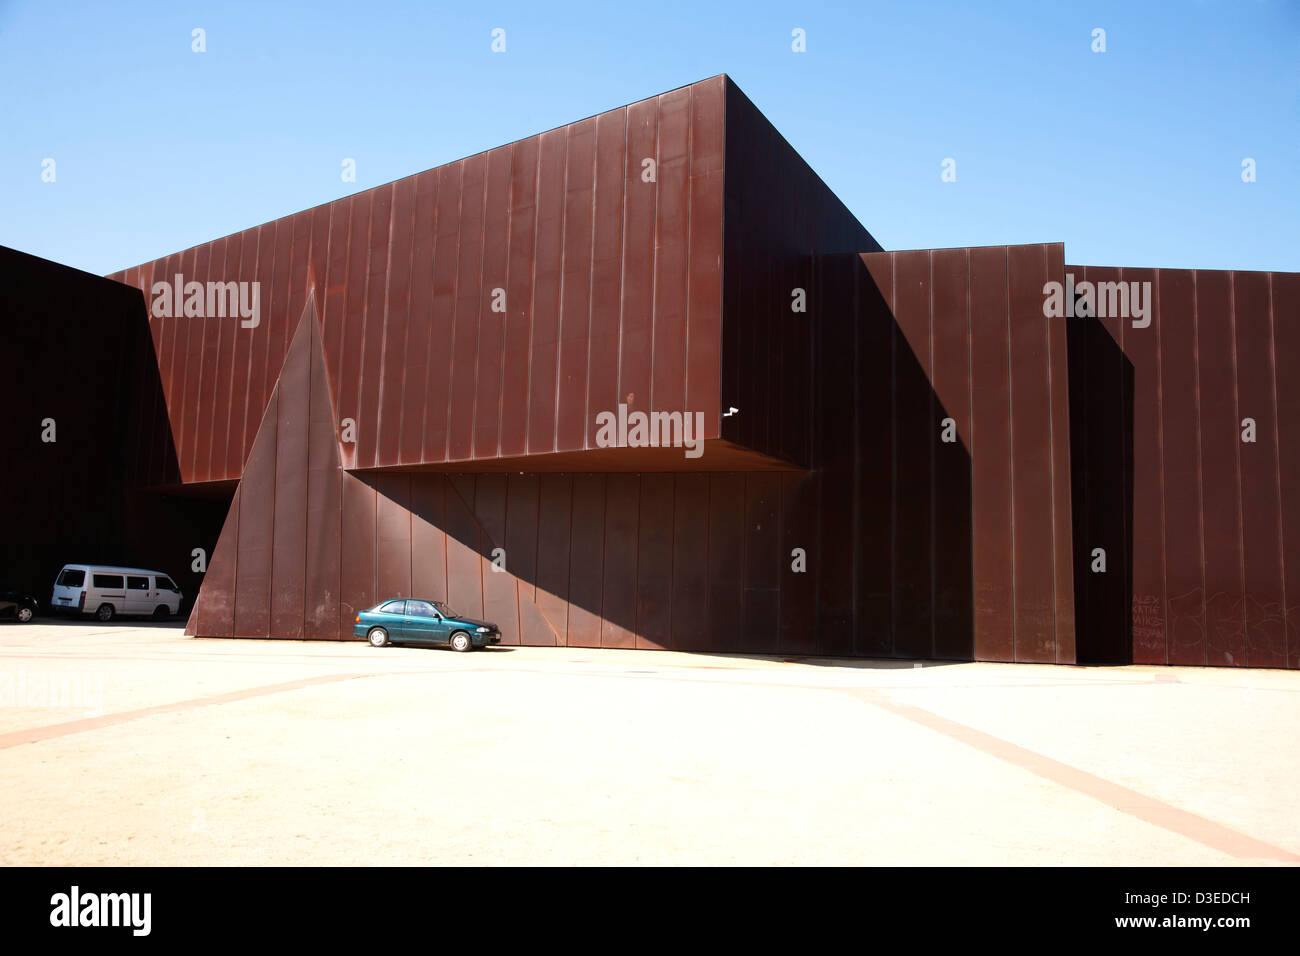 The rust covered panels of Australian architectural icon Australian Centre for Contemporary Art (ACCA) South Melbourne Australia Stock Photo